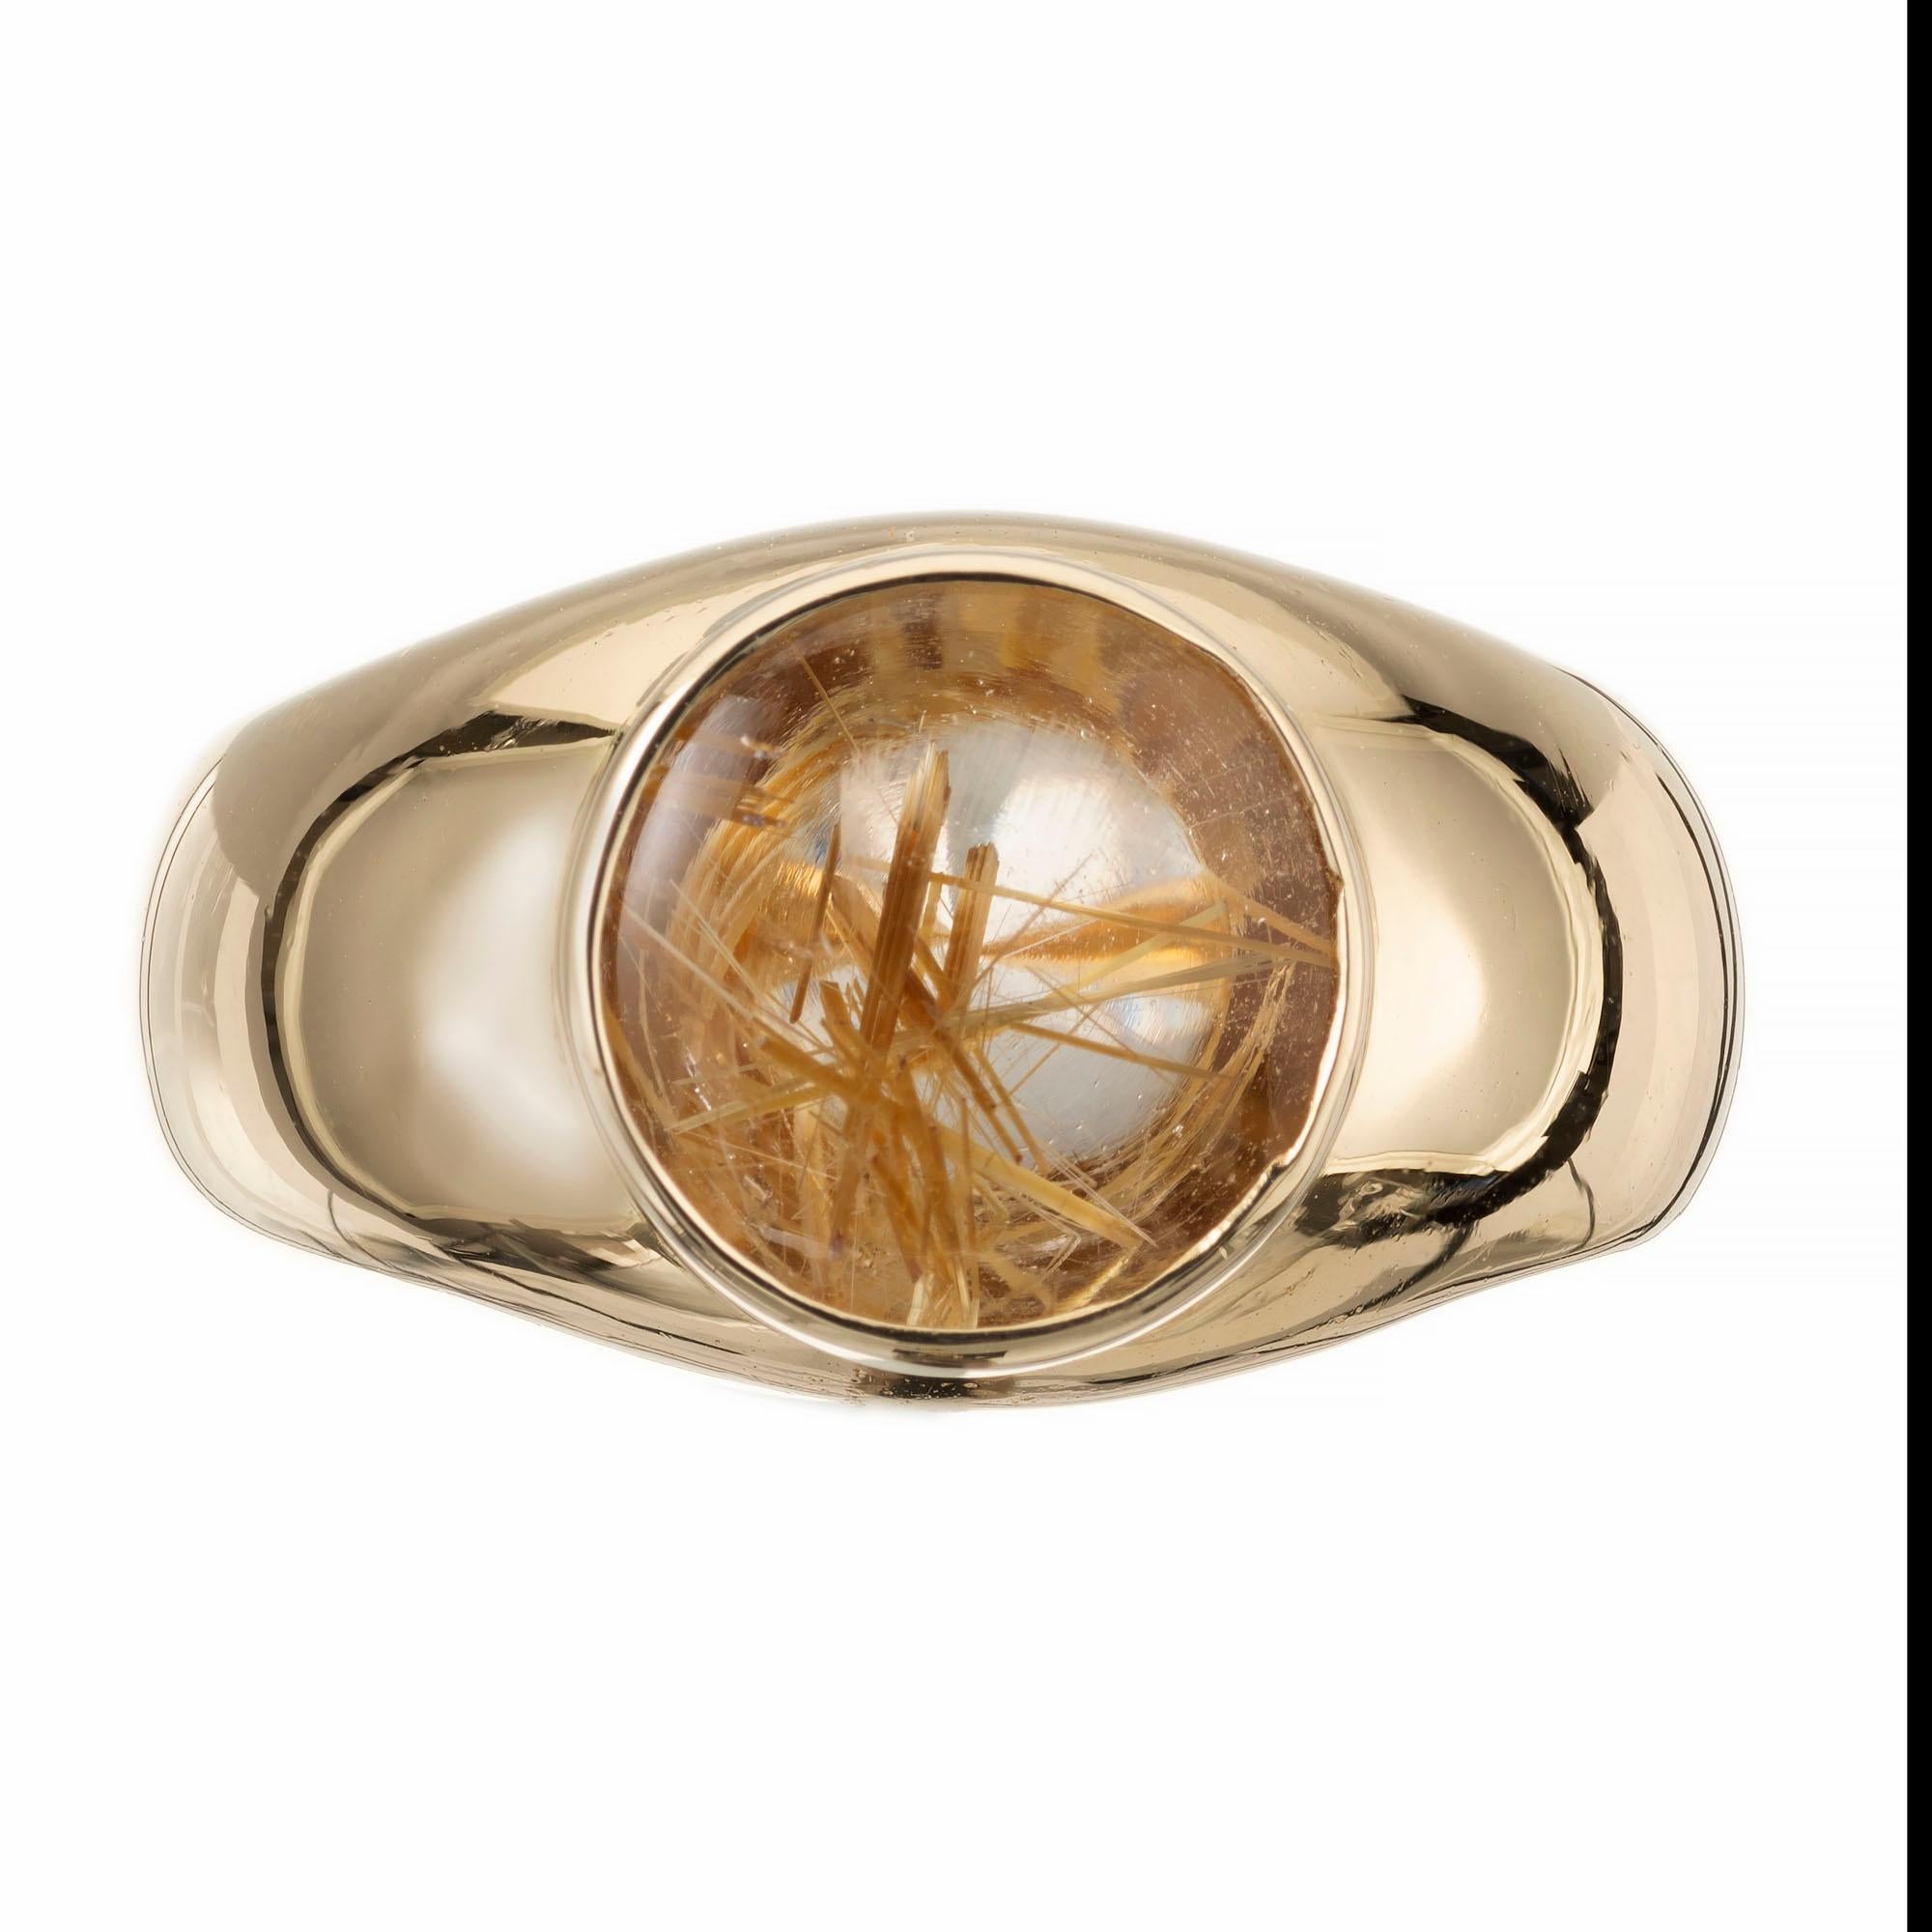 Unisex Bezel set natural Quartz with natural rutile needles set in a gold dome 18k yellow gold setting.  

1 round clear rutilated Quartz, approx. total weight 2.50cts, 10mm, Golden rutile needles
Size 8 1/2 and sizable
18k Yellow Gold
12.00